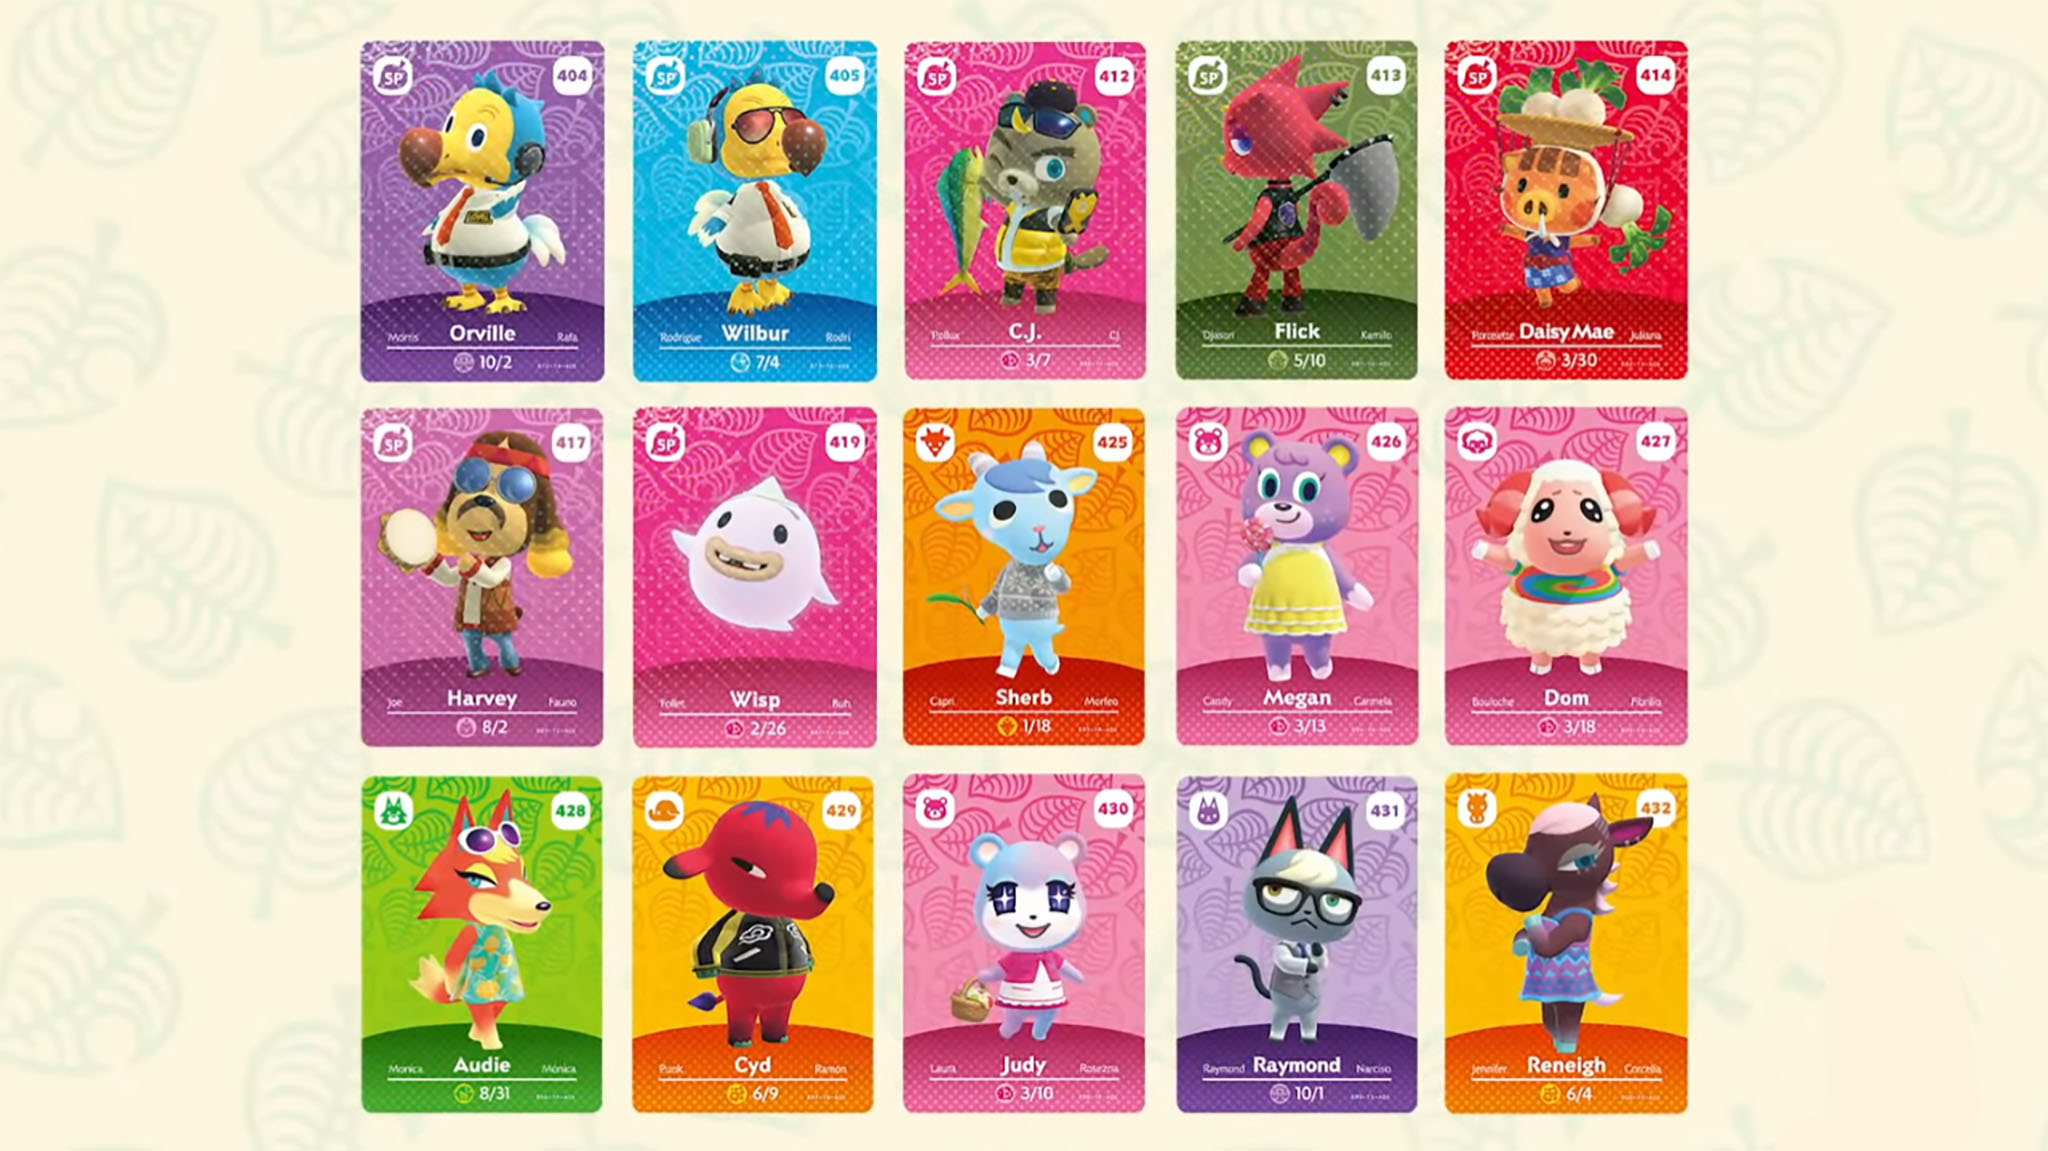 Dom Sherb Custom Amiibo Cards Judy Audie Reneigh Raymond Megan Cyd SERIES 5 Full Set: All 48 Cards PLUS 40 others Fast Shipping!!